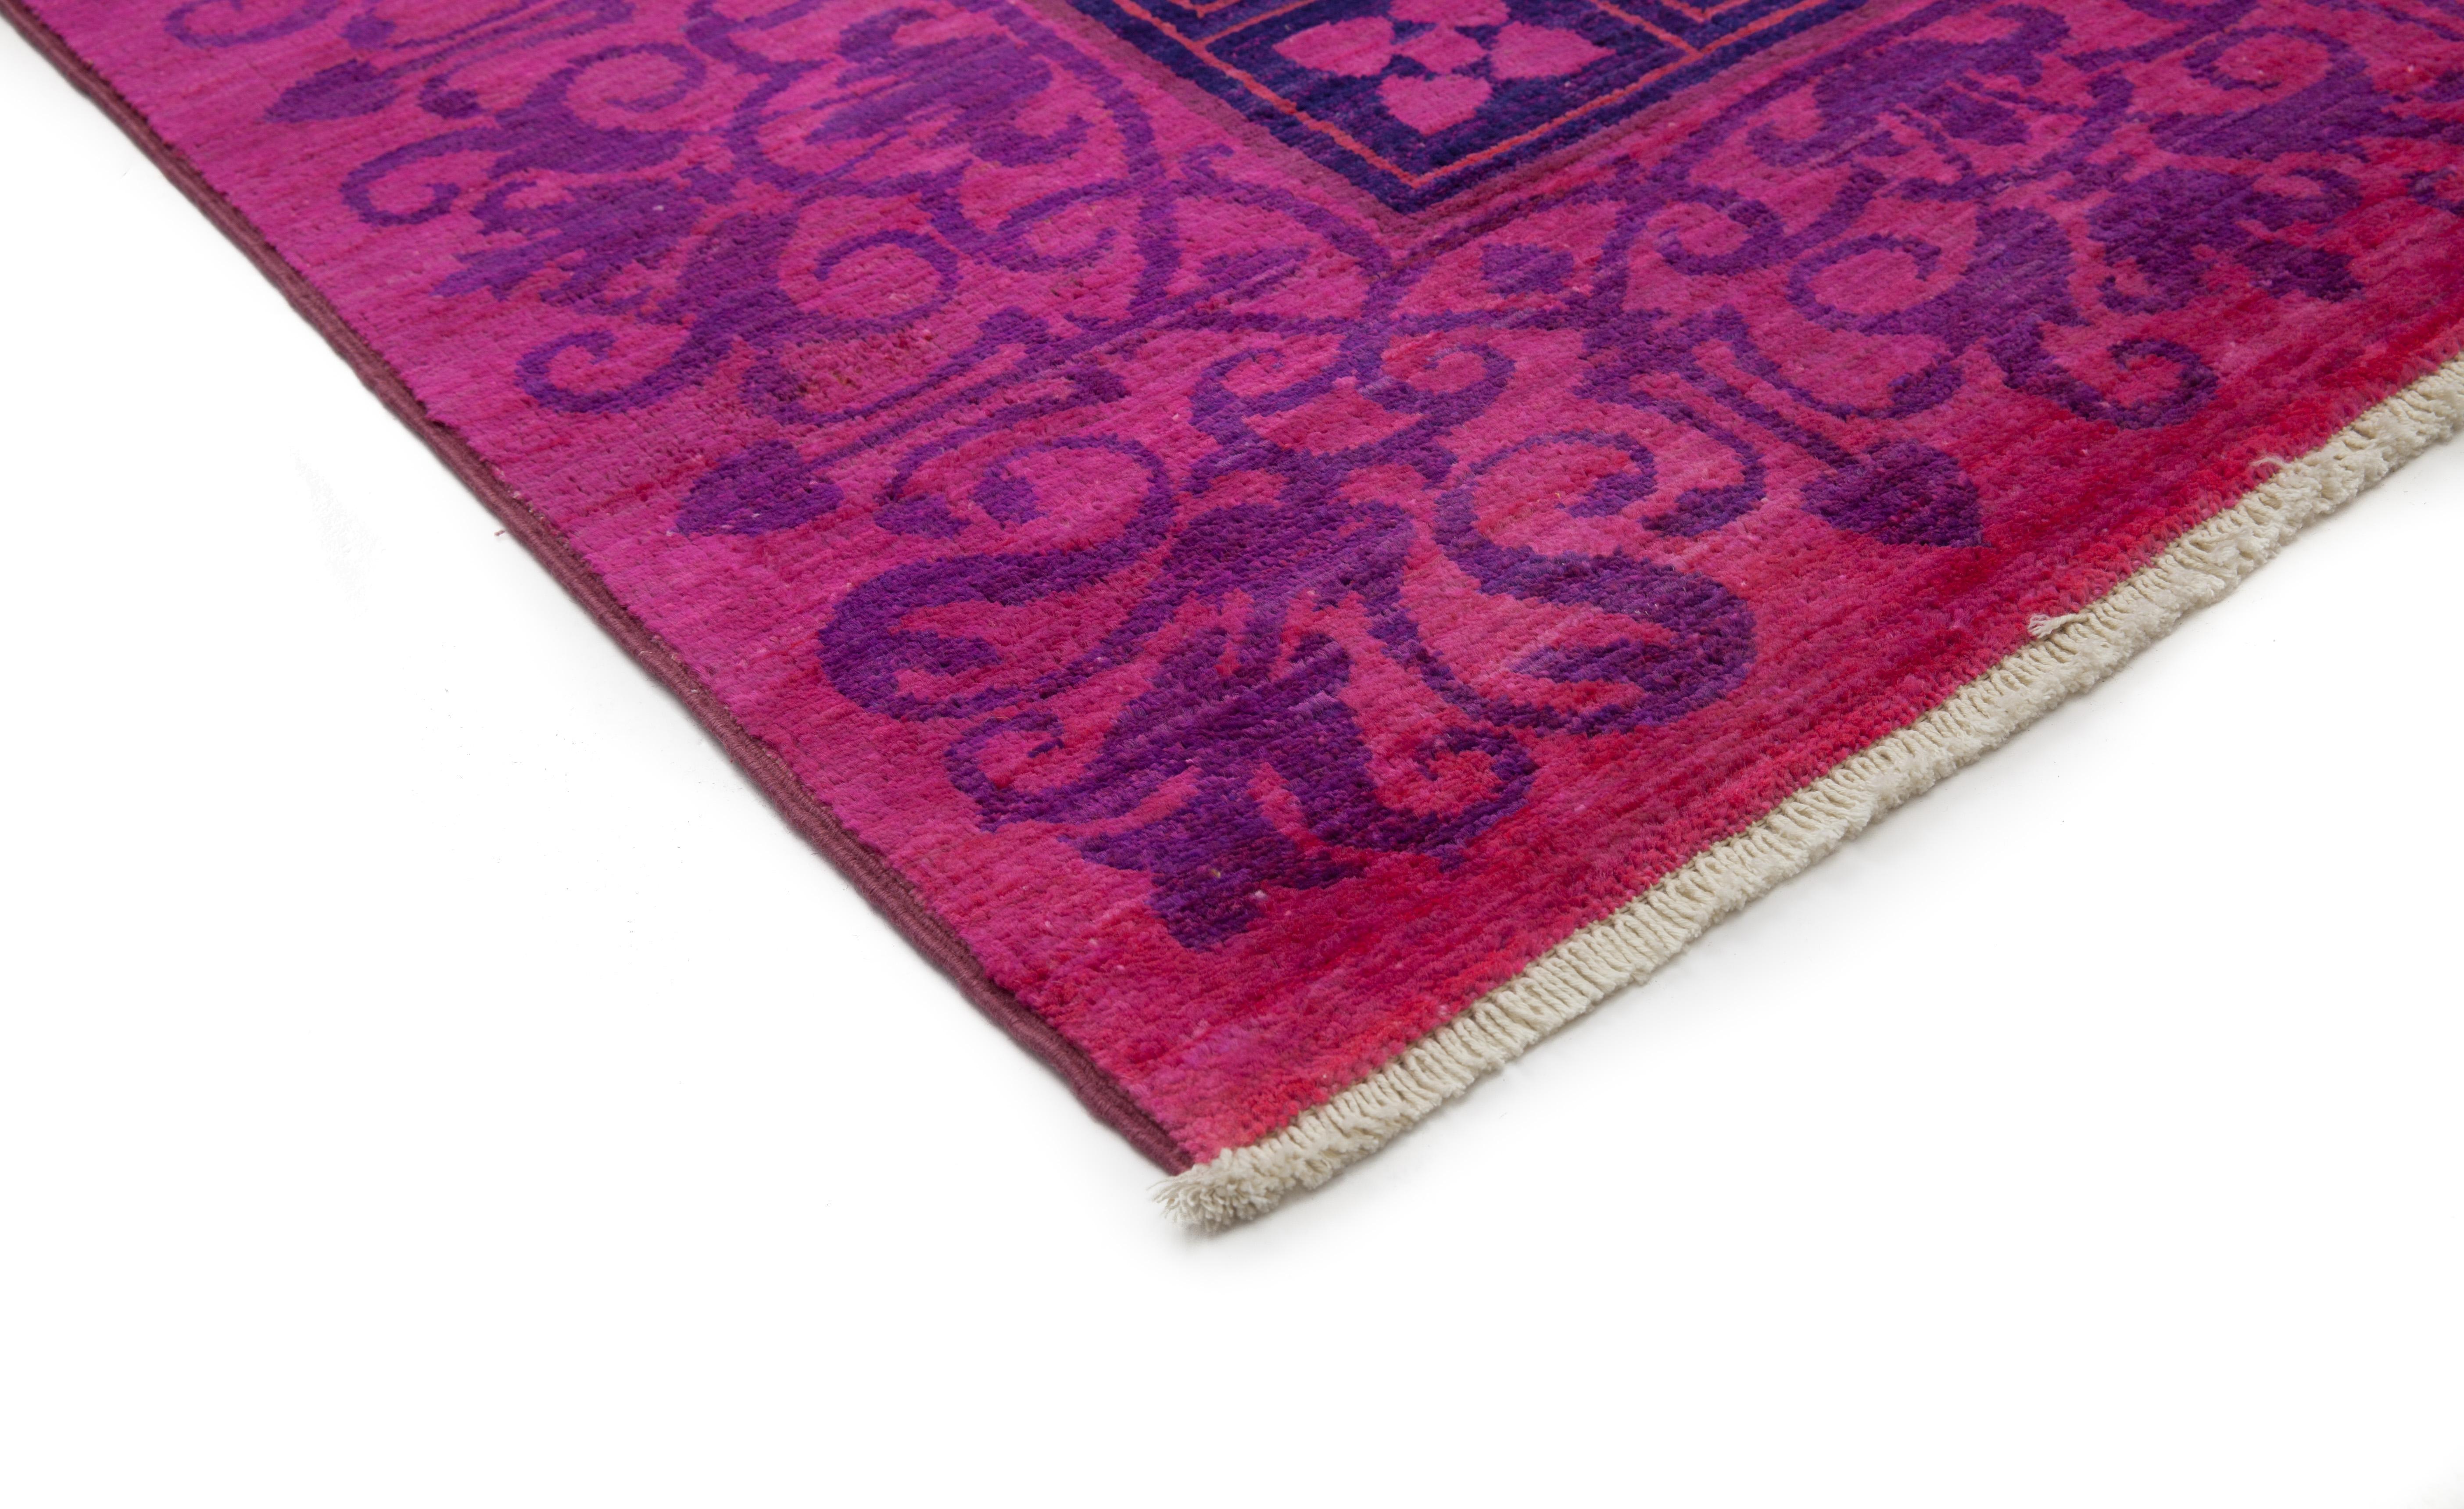 The wide-ranging Ziegler collection includes area rugs and large carpets in traditional Persian style but not as elaborated or complex. The designs are bold, striking and colorful. Heriz rugs, South Persian tribal pieces, true Ziegler Sultanabads,